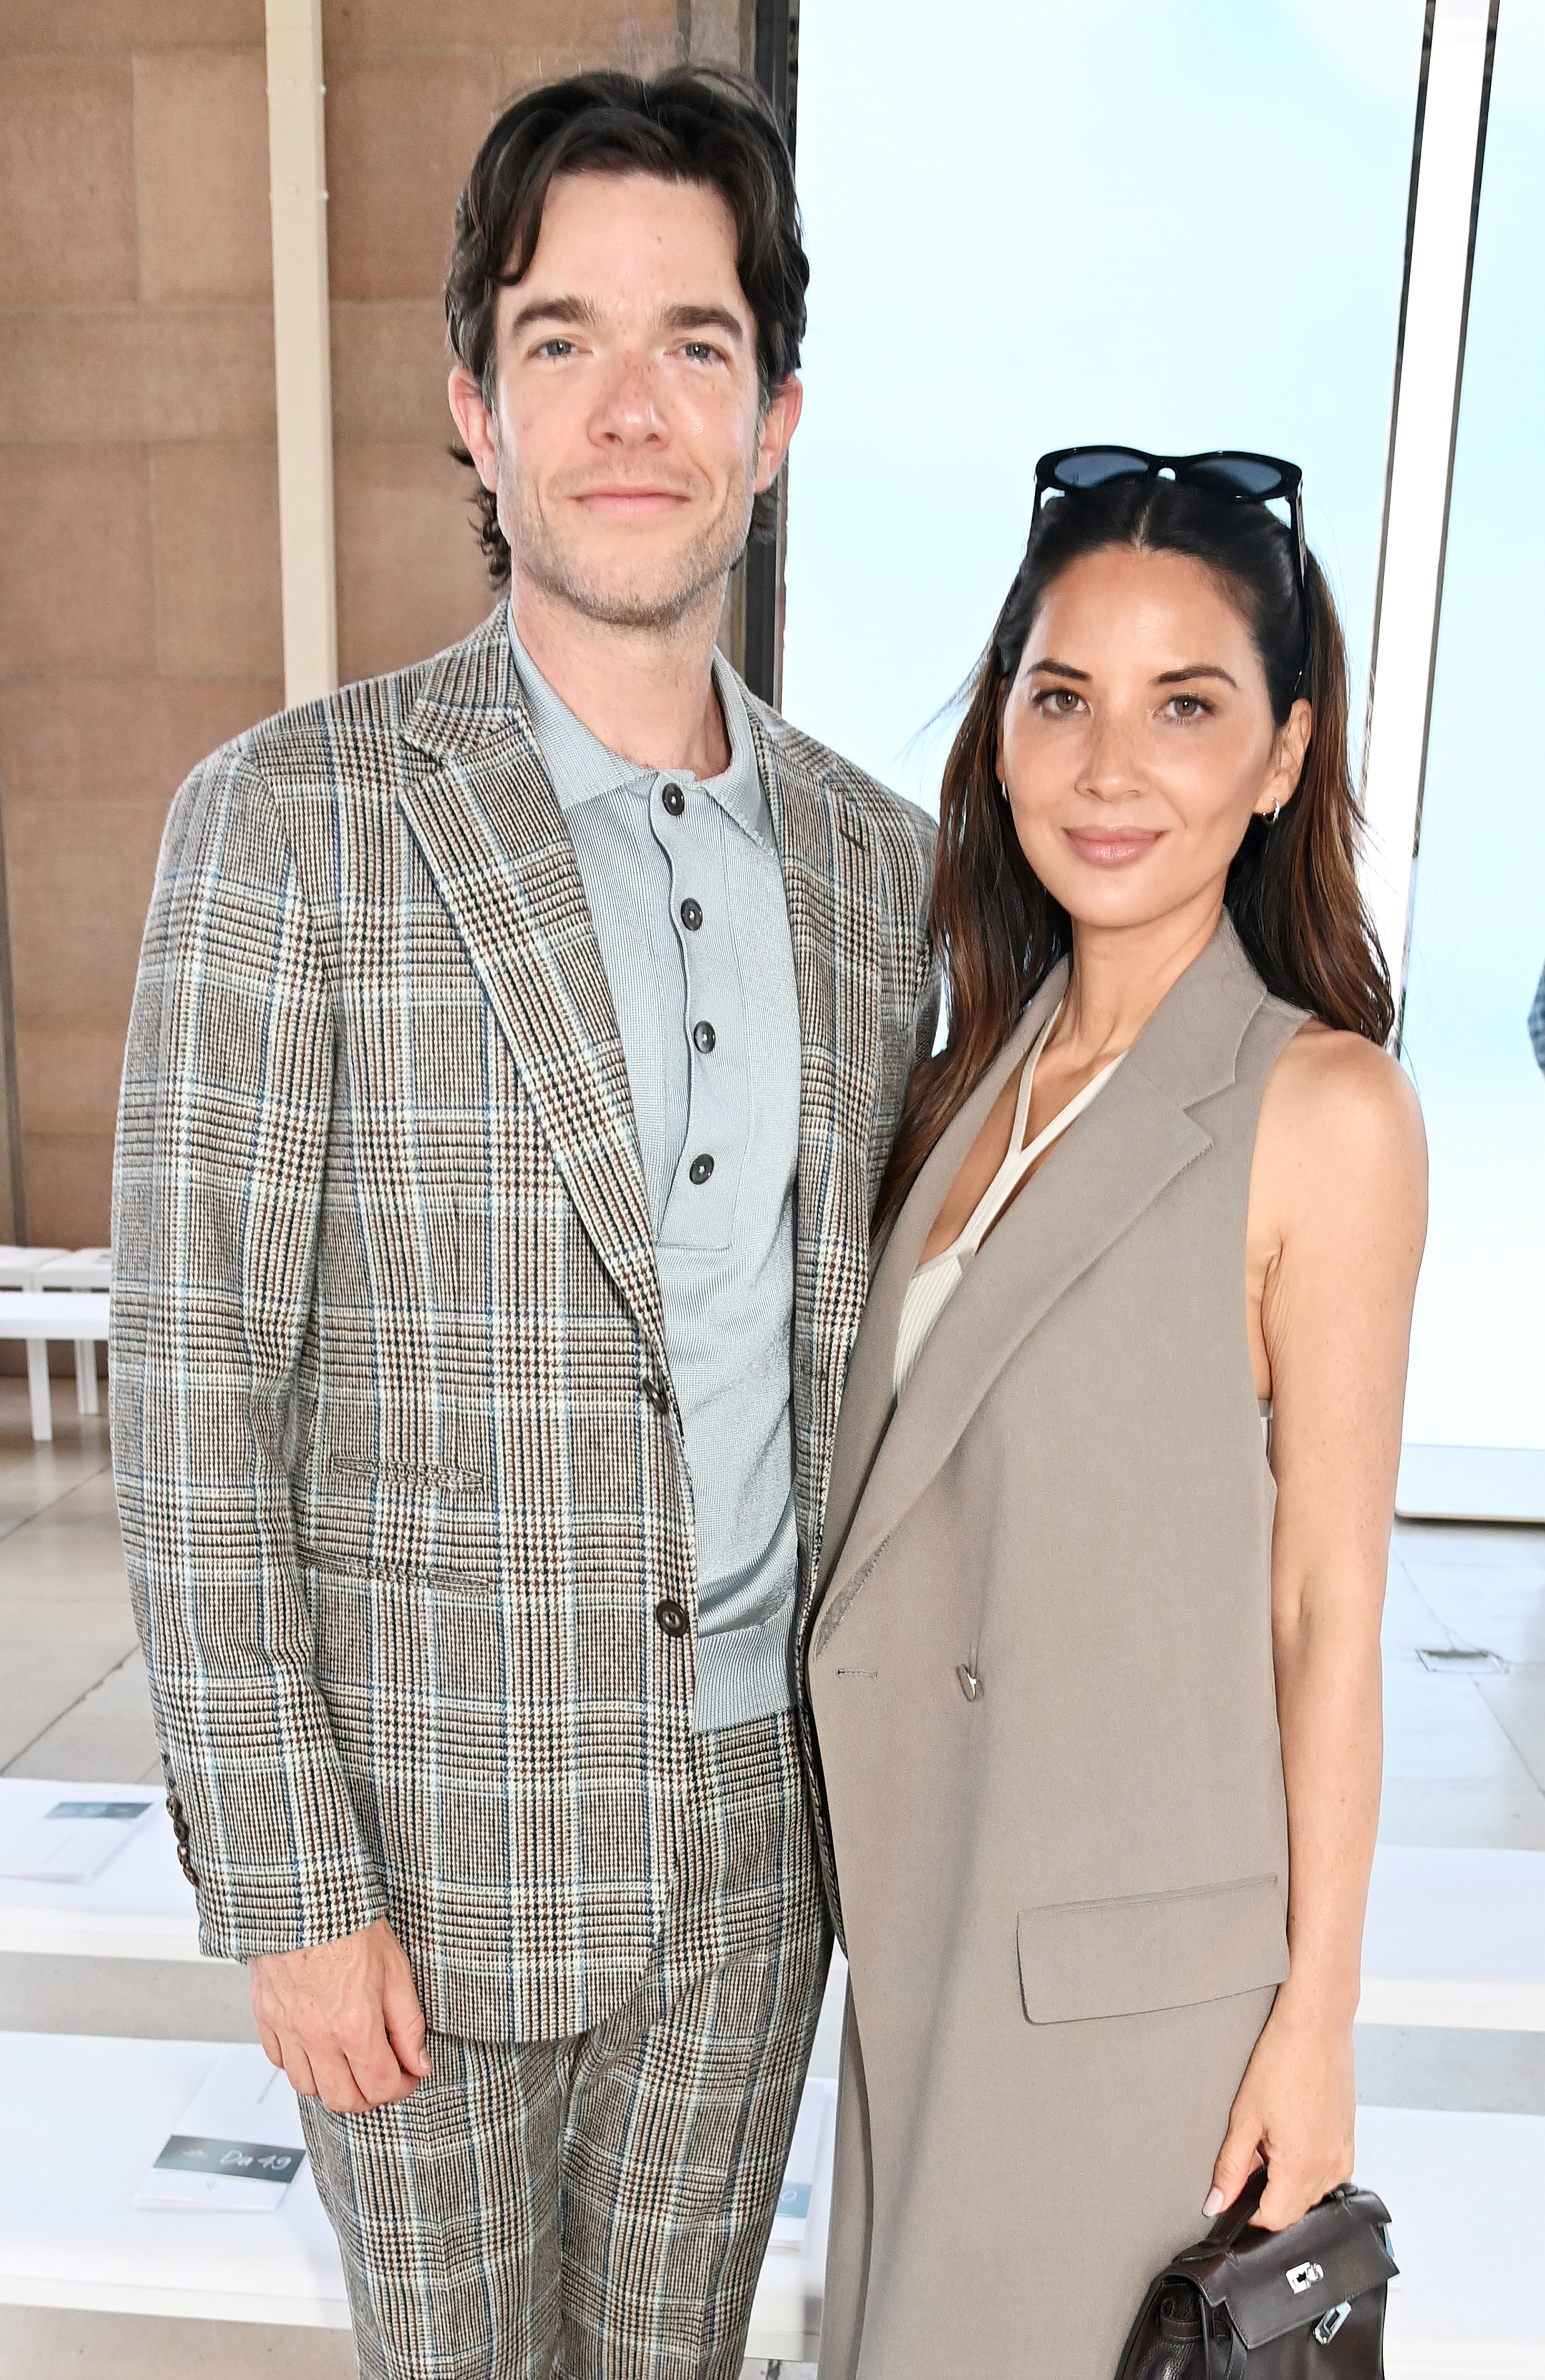 This marks the second marriage for John Mulaney and first for Olivia Munn